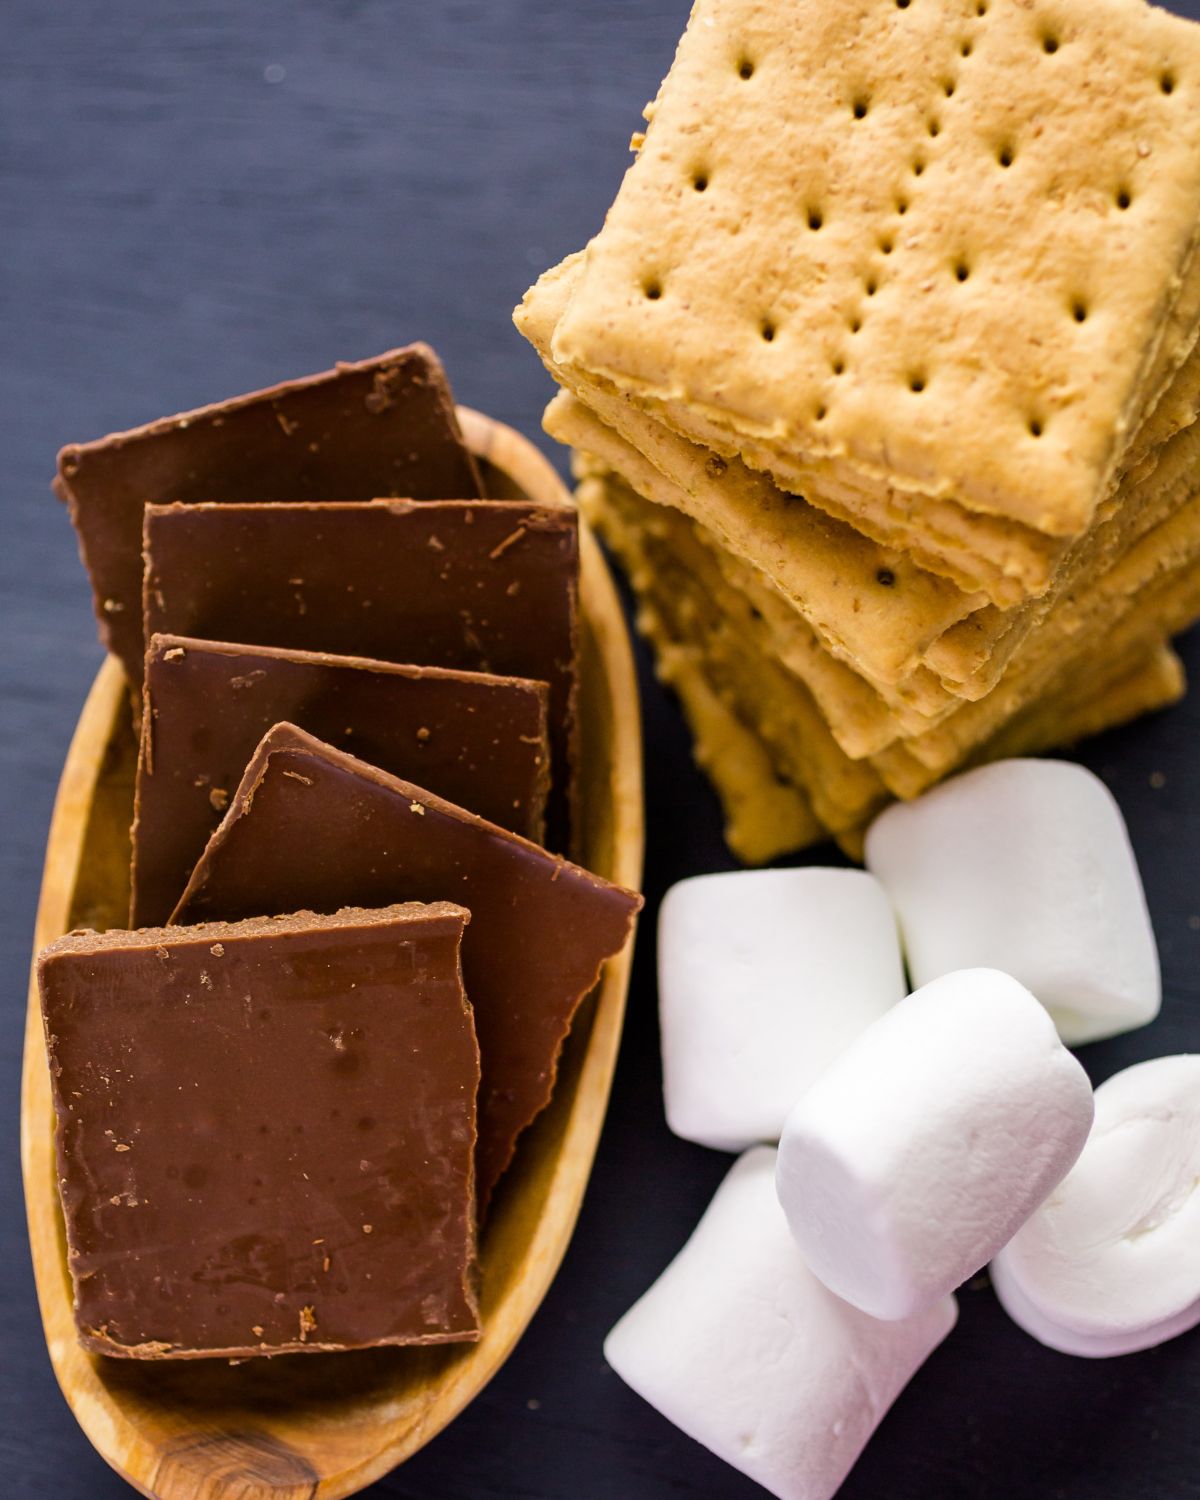 Chocolate bars, marshmallows and crackers.